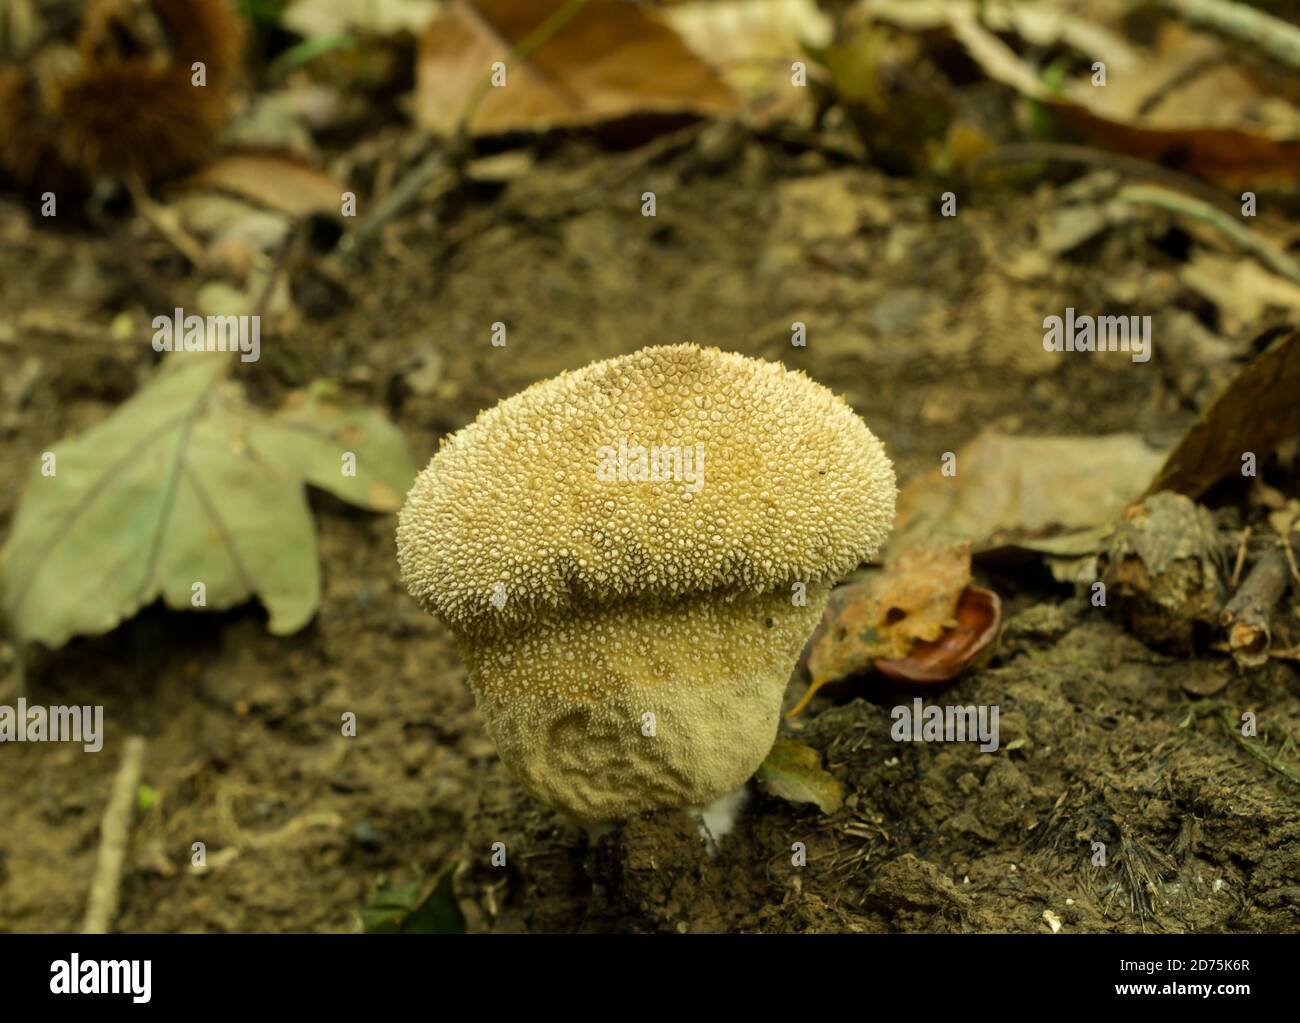 A partly depleted and mature puffball or lycoperdon perlatum. Found in Autumn woodland. Stock Photo